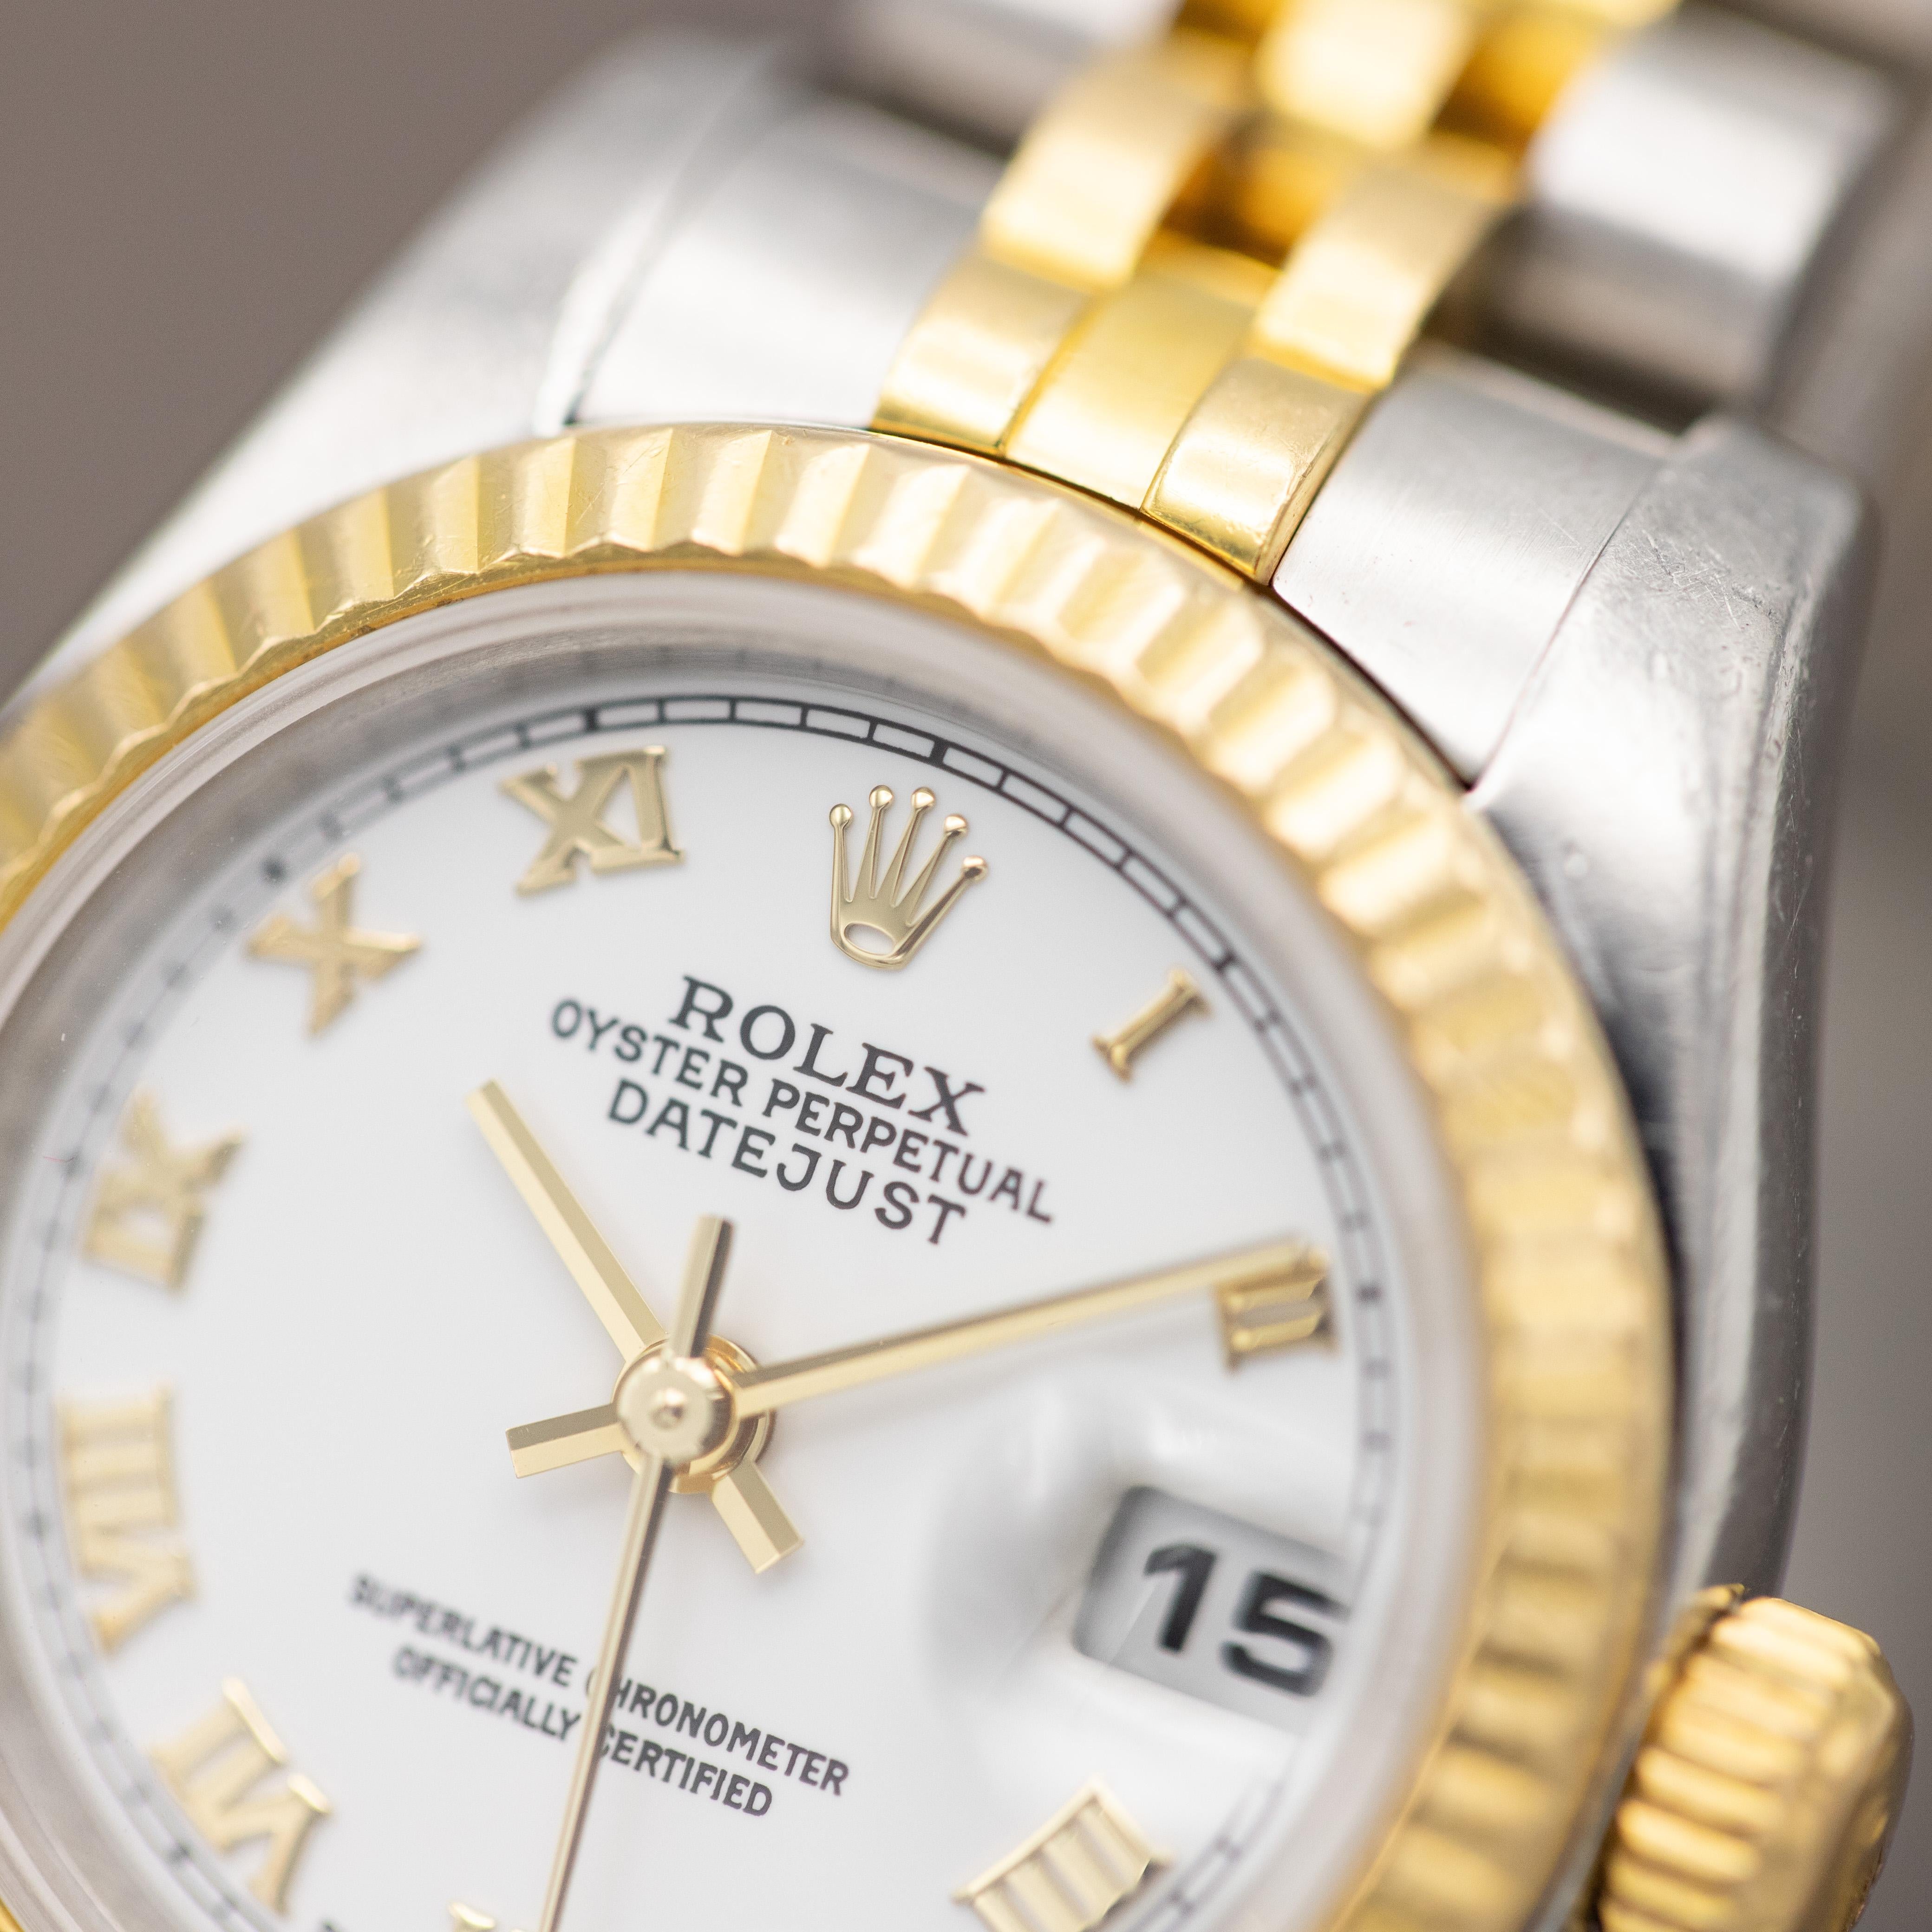 Modern Rolex Oyster Perpetual Lady Datejust Automatic - Vintage Ladies' Watch - Jubilee